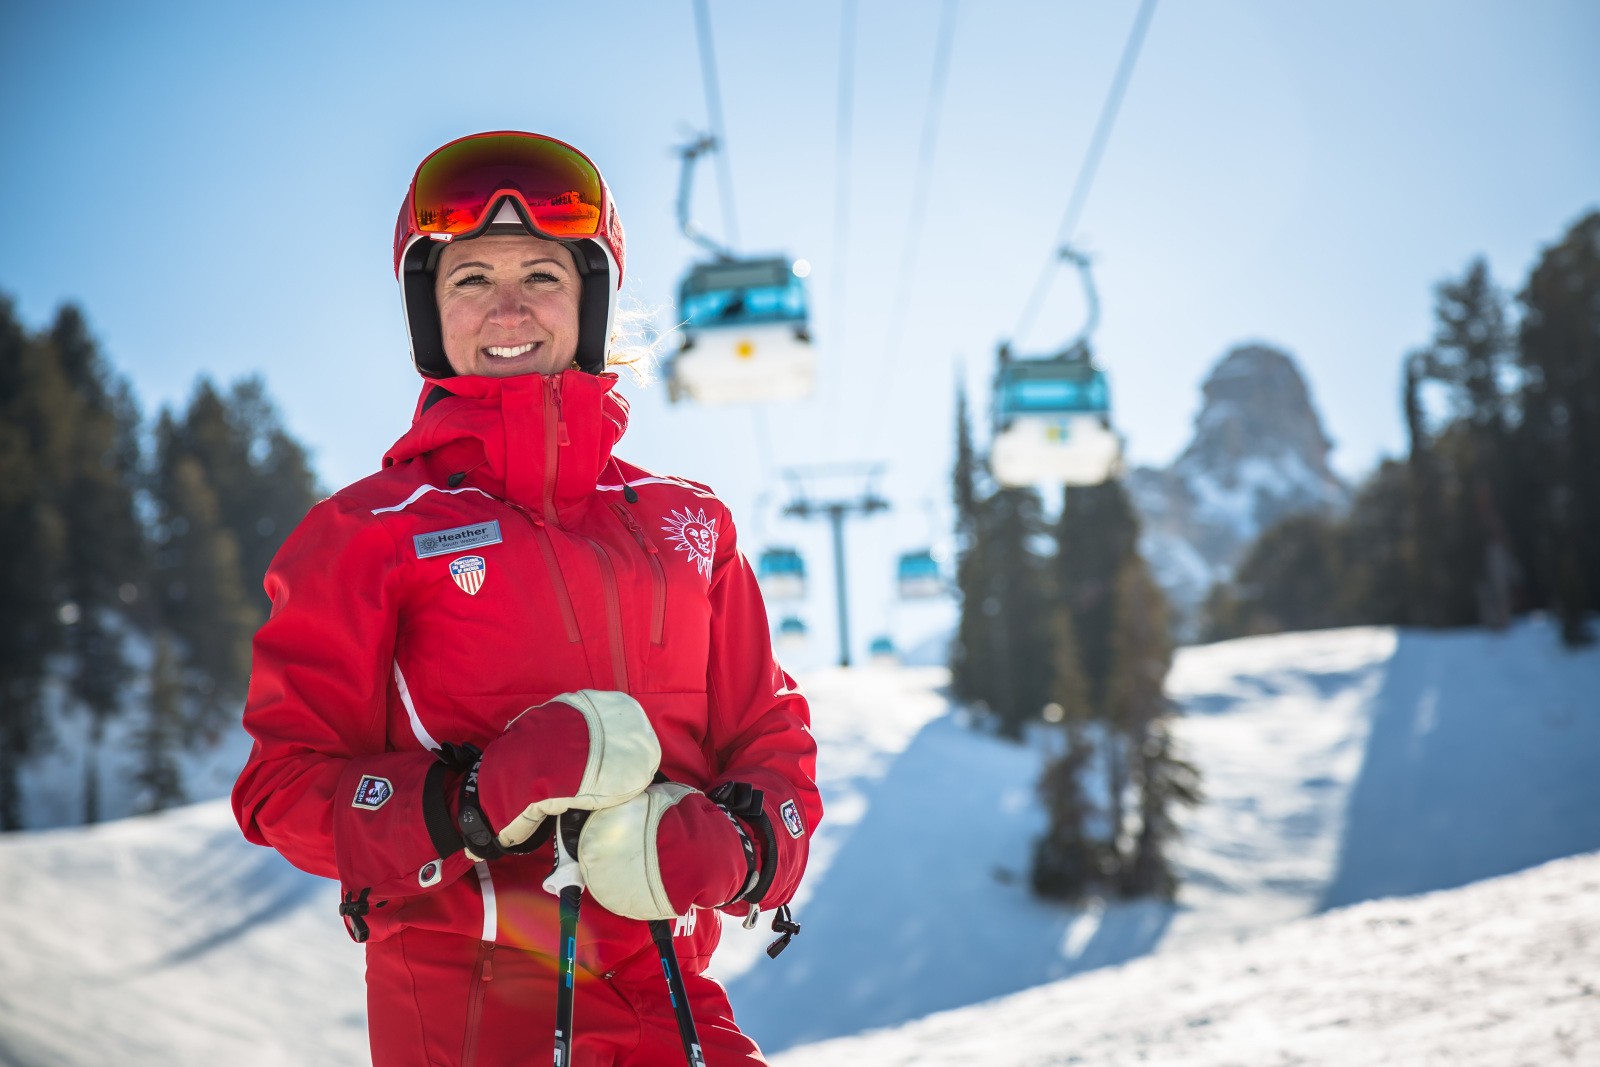  Essential Tips for Learning to Ski as an Adult, from Someone Who’s Been There